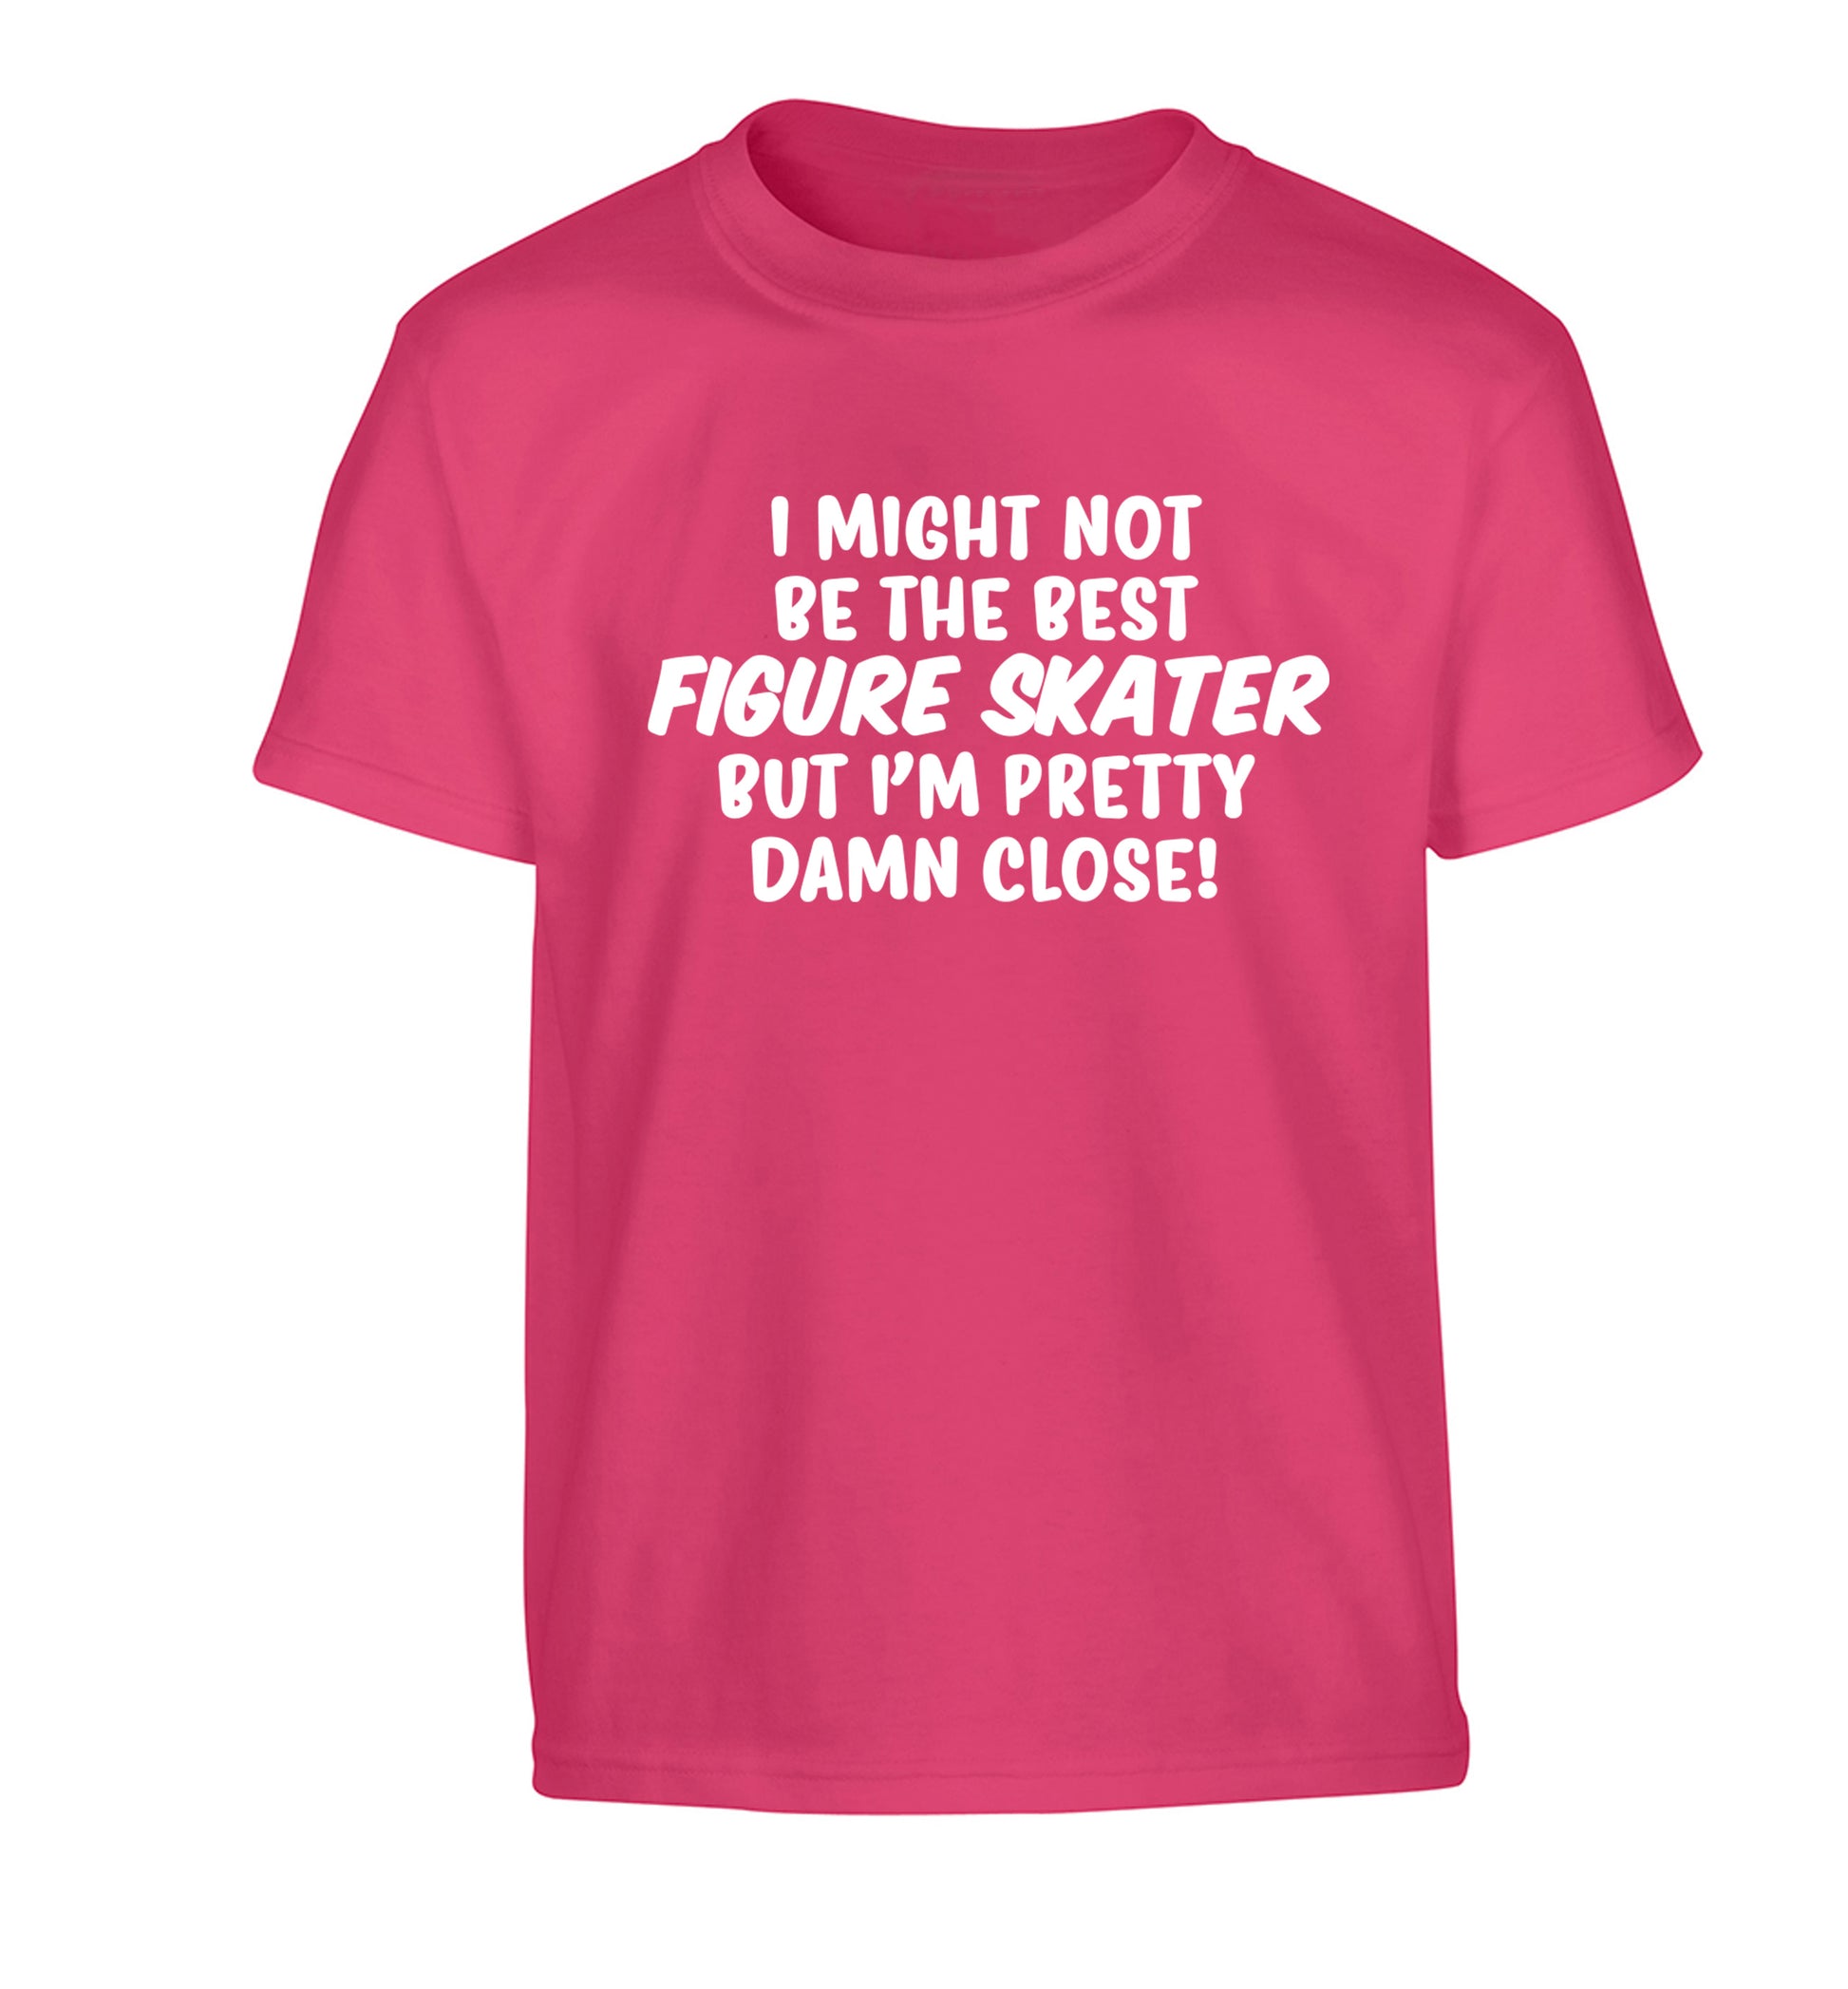 I might not be the best figure skater but I'm pretty damn close! Children's pink Tshirt 12-14 Years